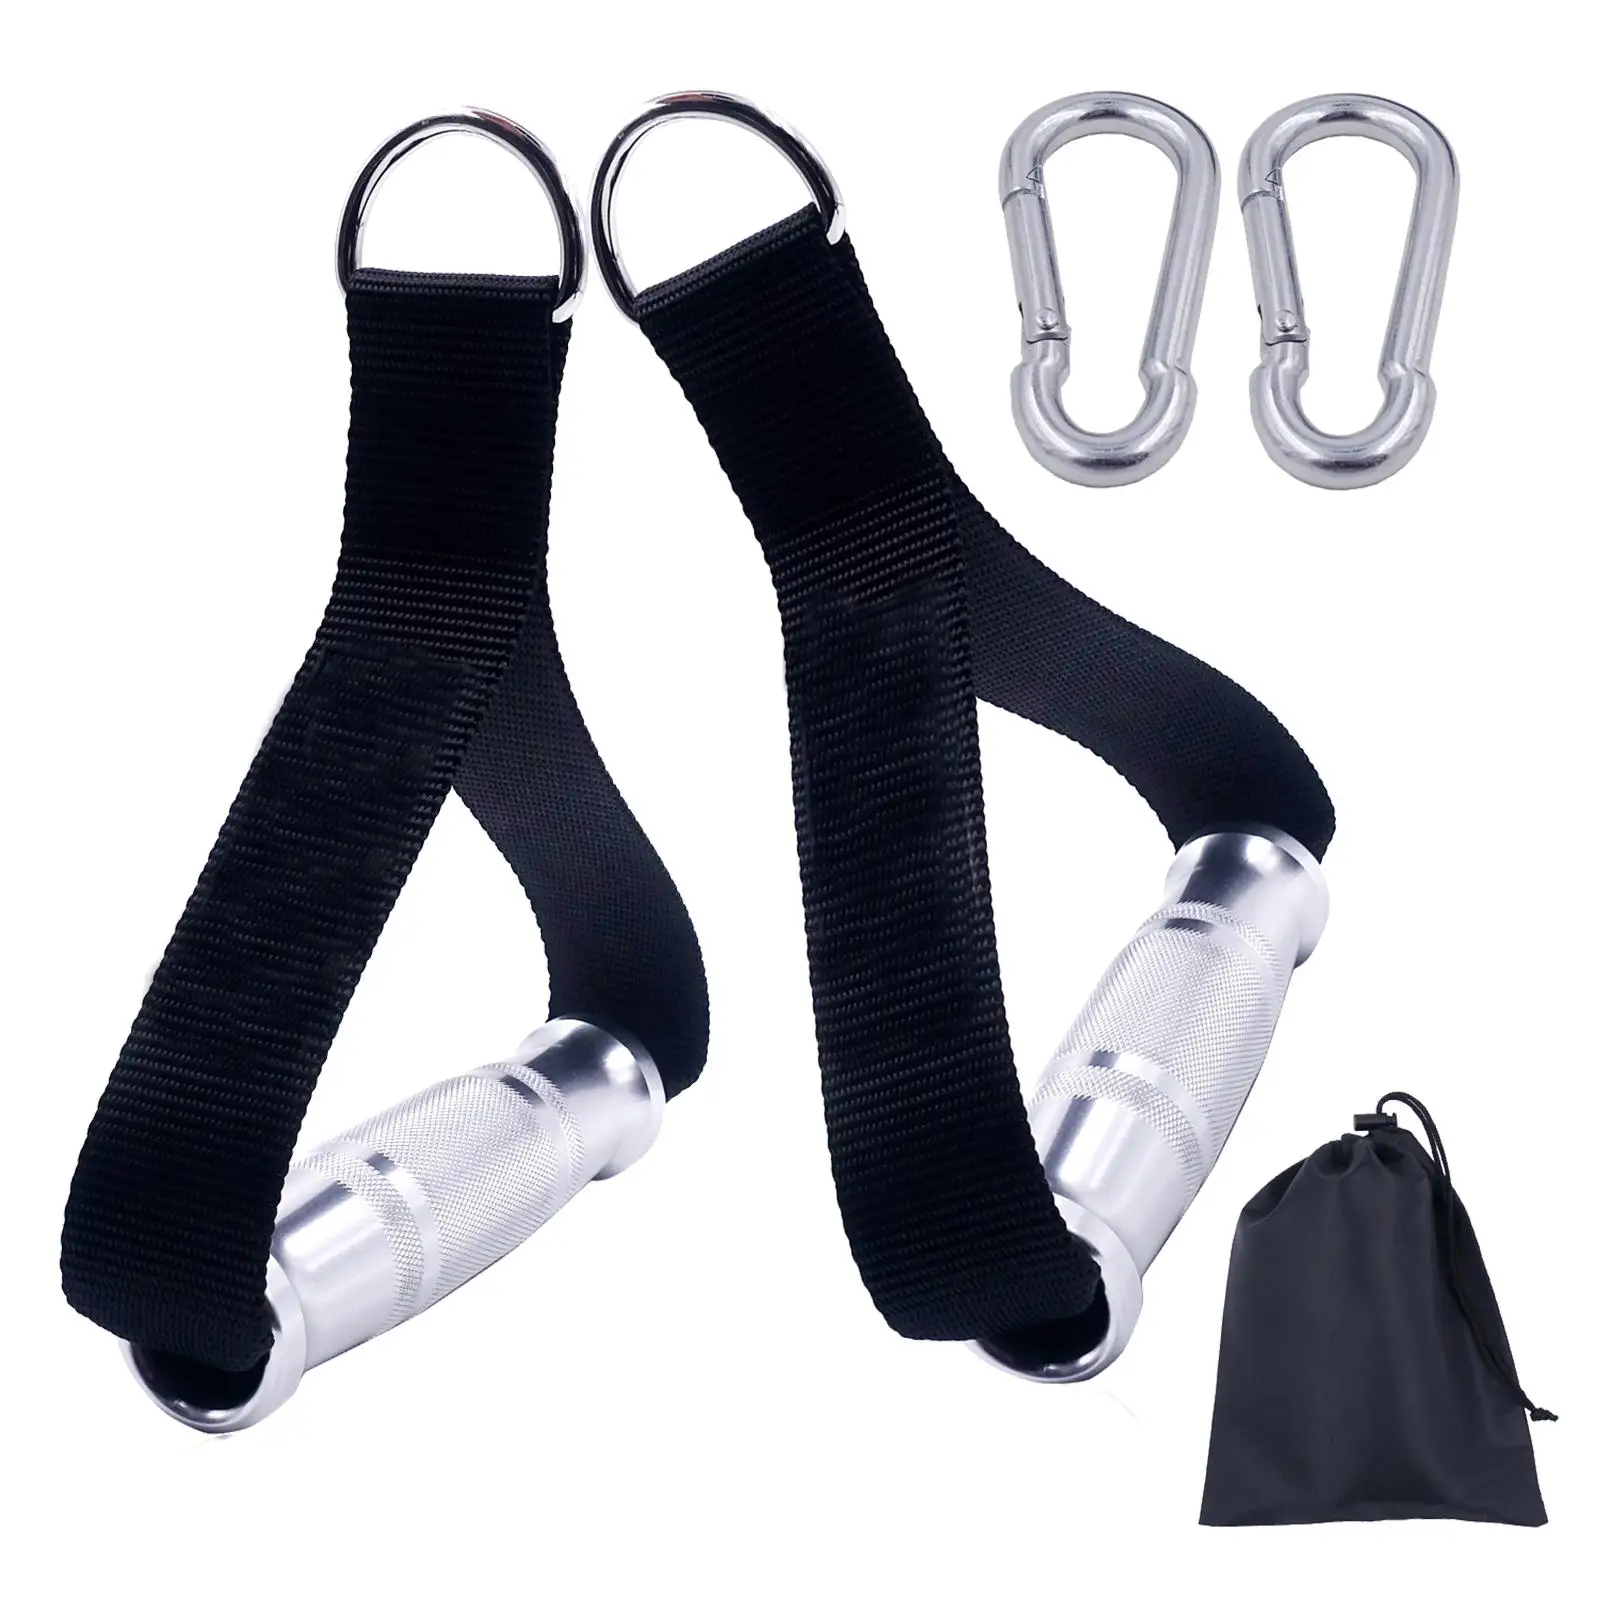 Resistance Bands Handle Metal Grips Nylon Webbing Cable Machine Attachment Grips